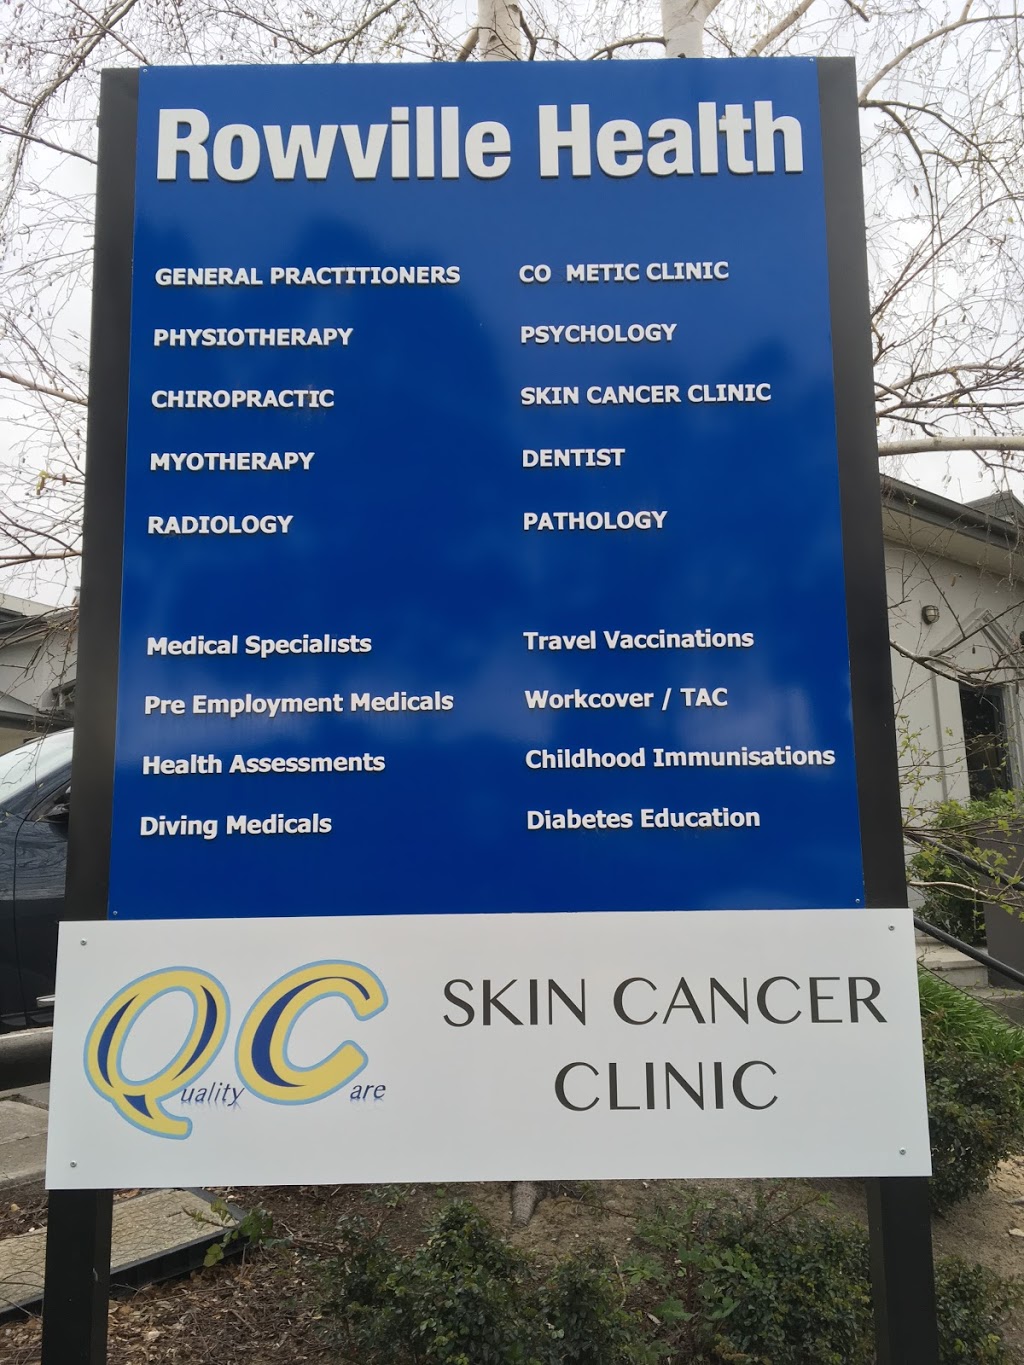 QC skin cancer clinic (12 St Lawrance Way) Opening Hours